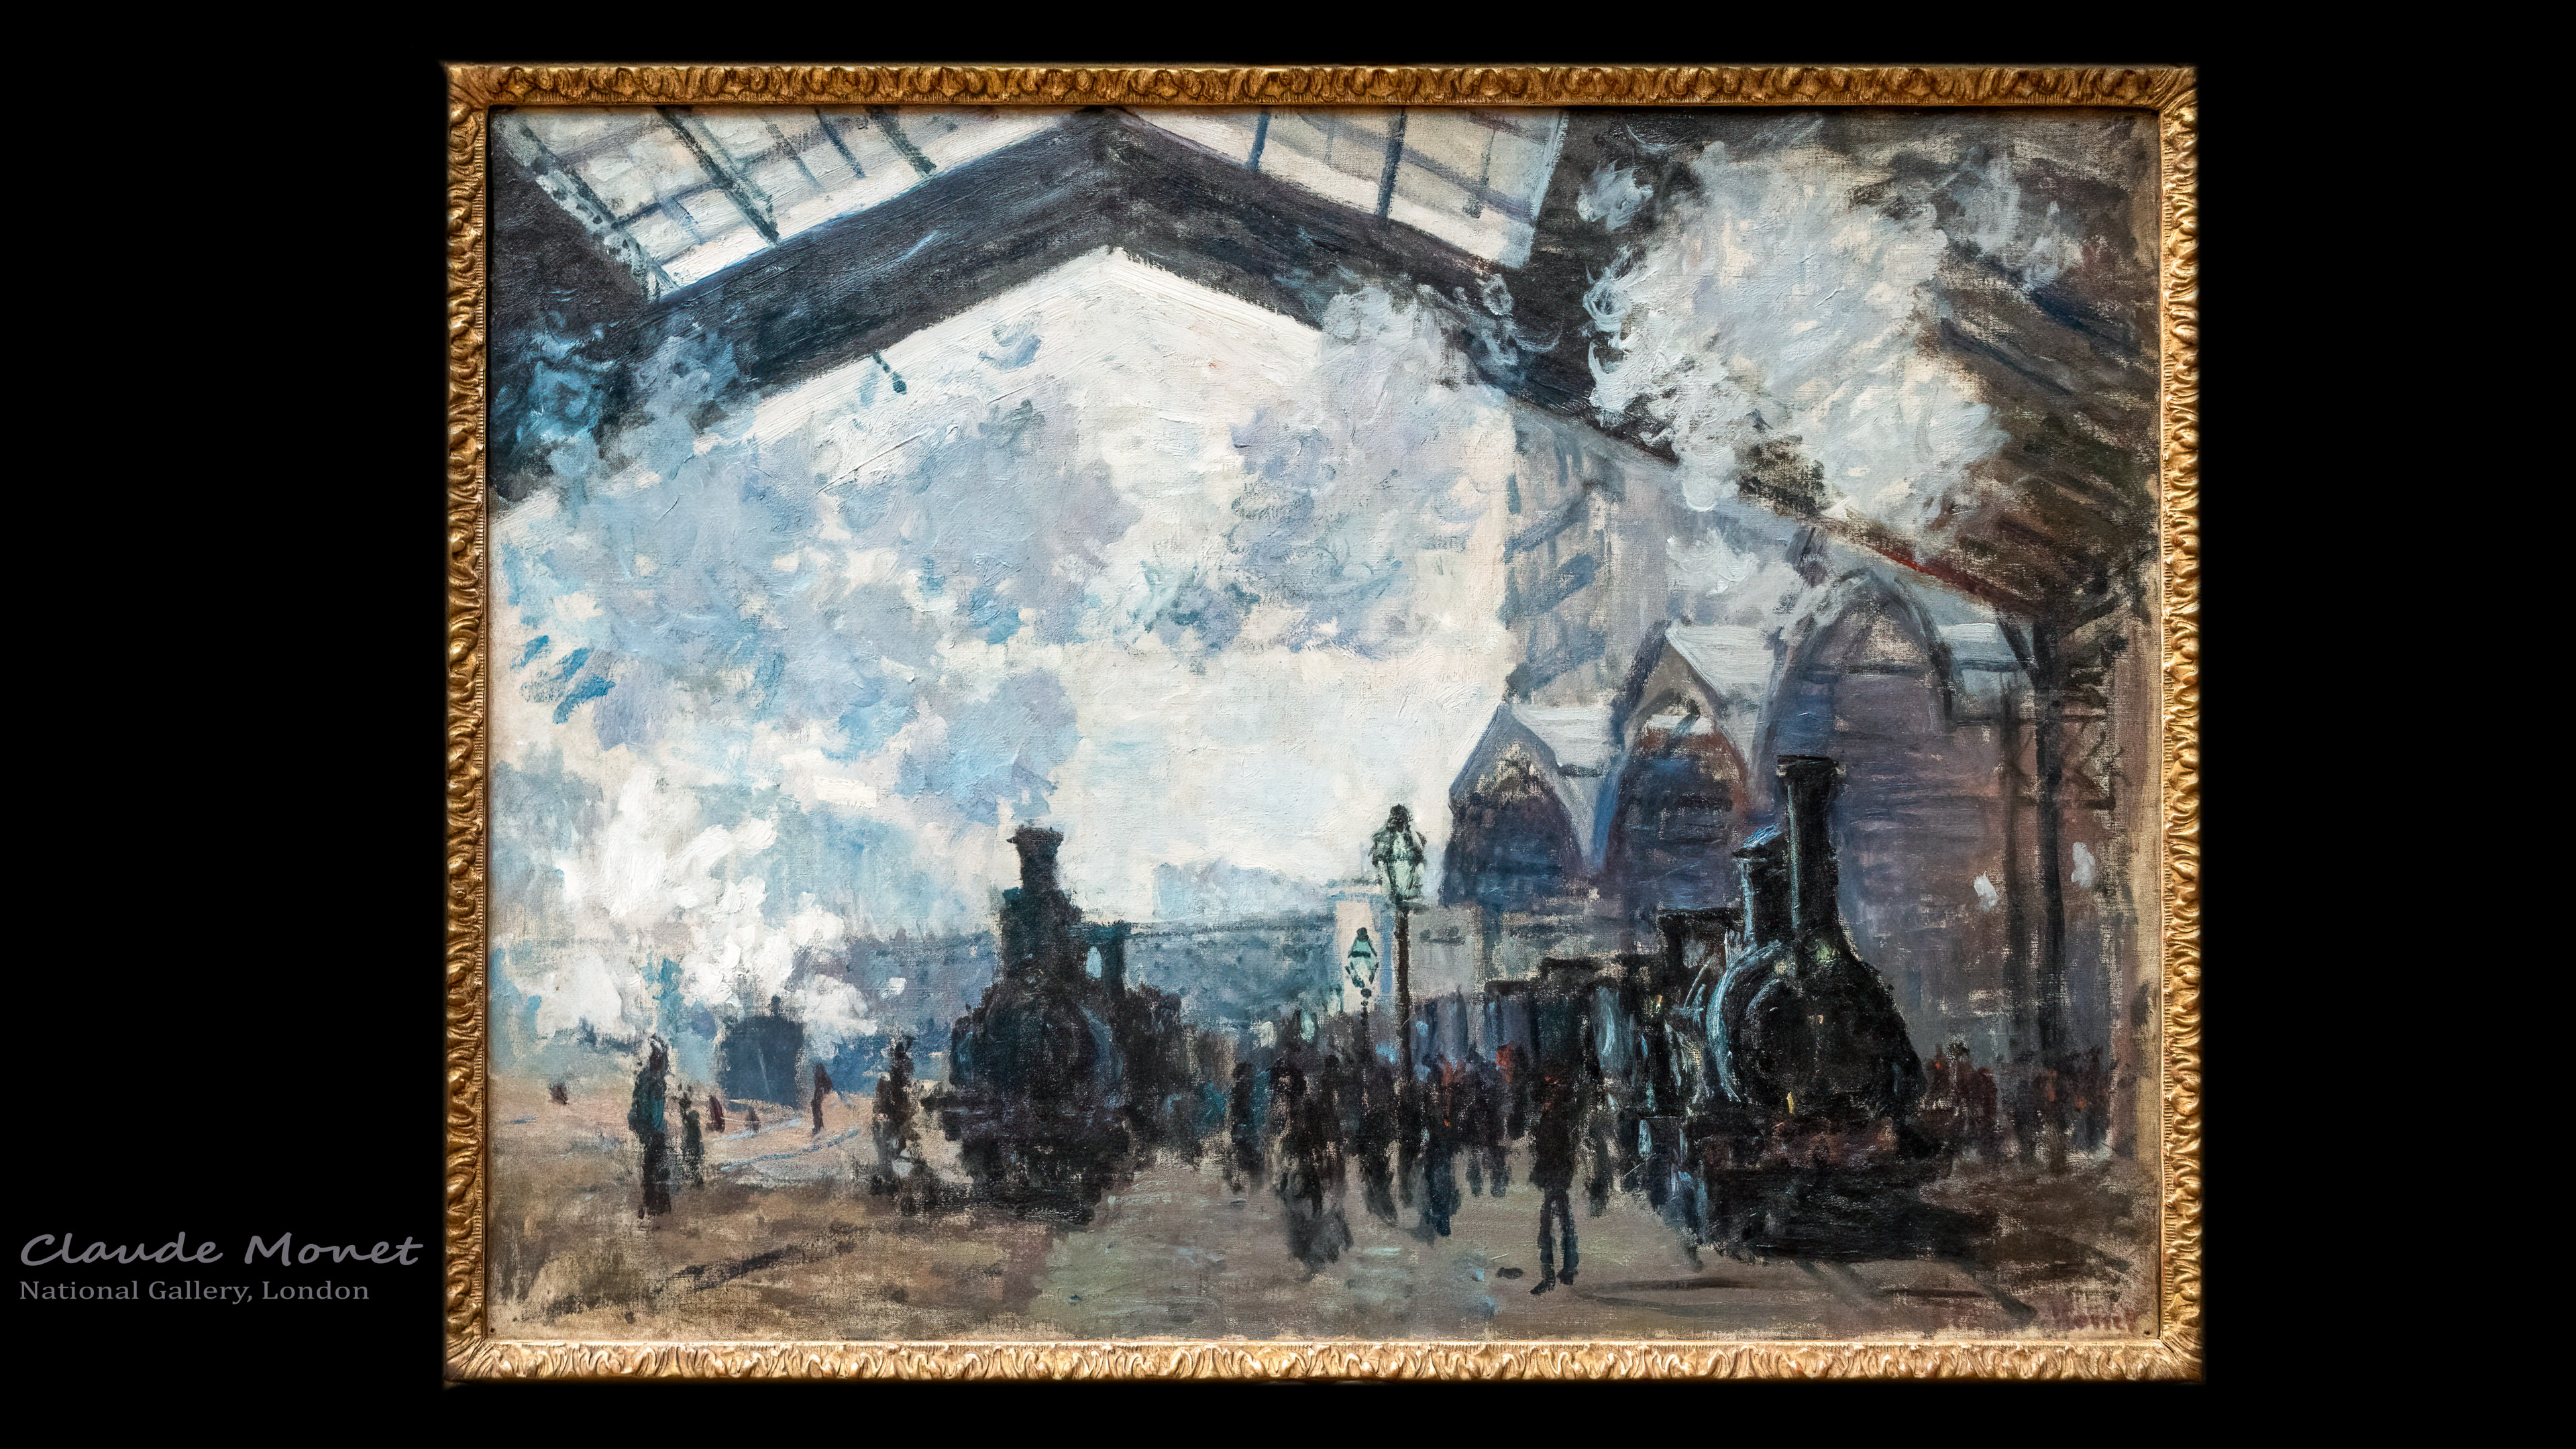 Adorn your screens with the timeless charm of Claude Monet's 'La Gare Saint-Lazare'